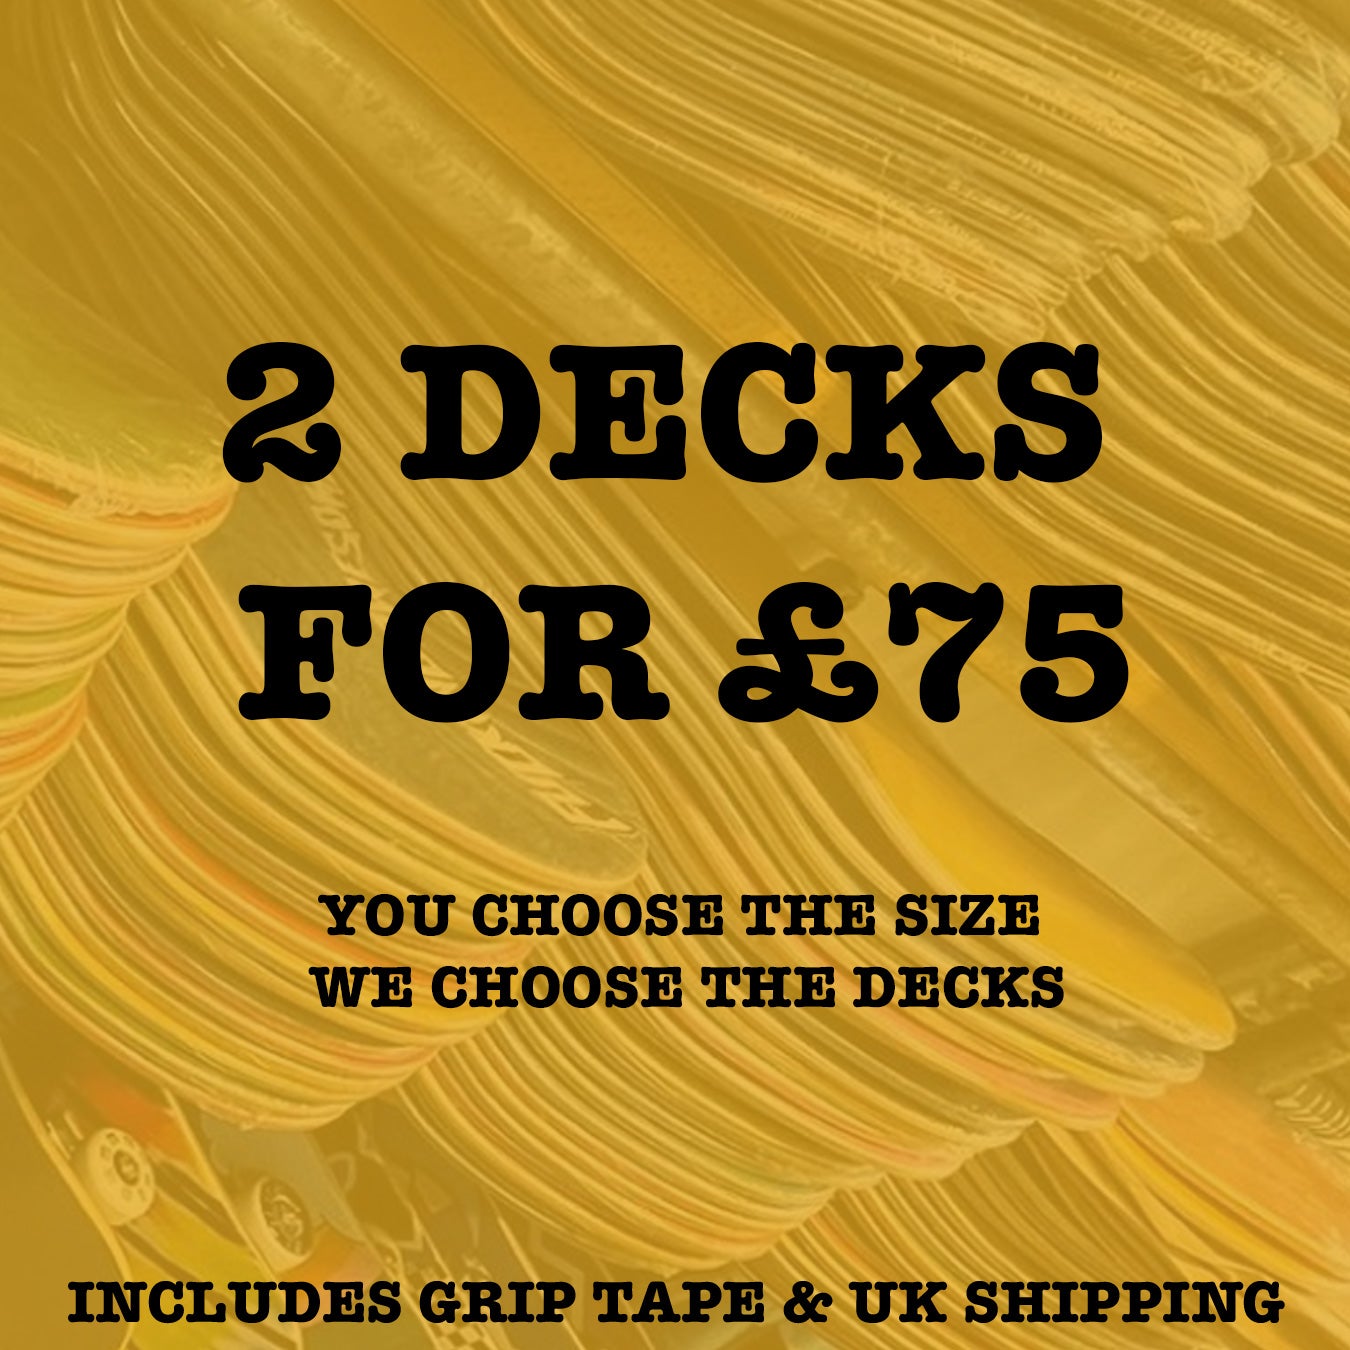 Deck Mystery Boxes - 2 for £75!